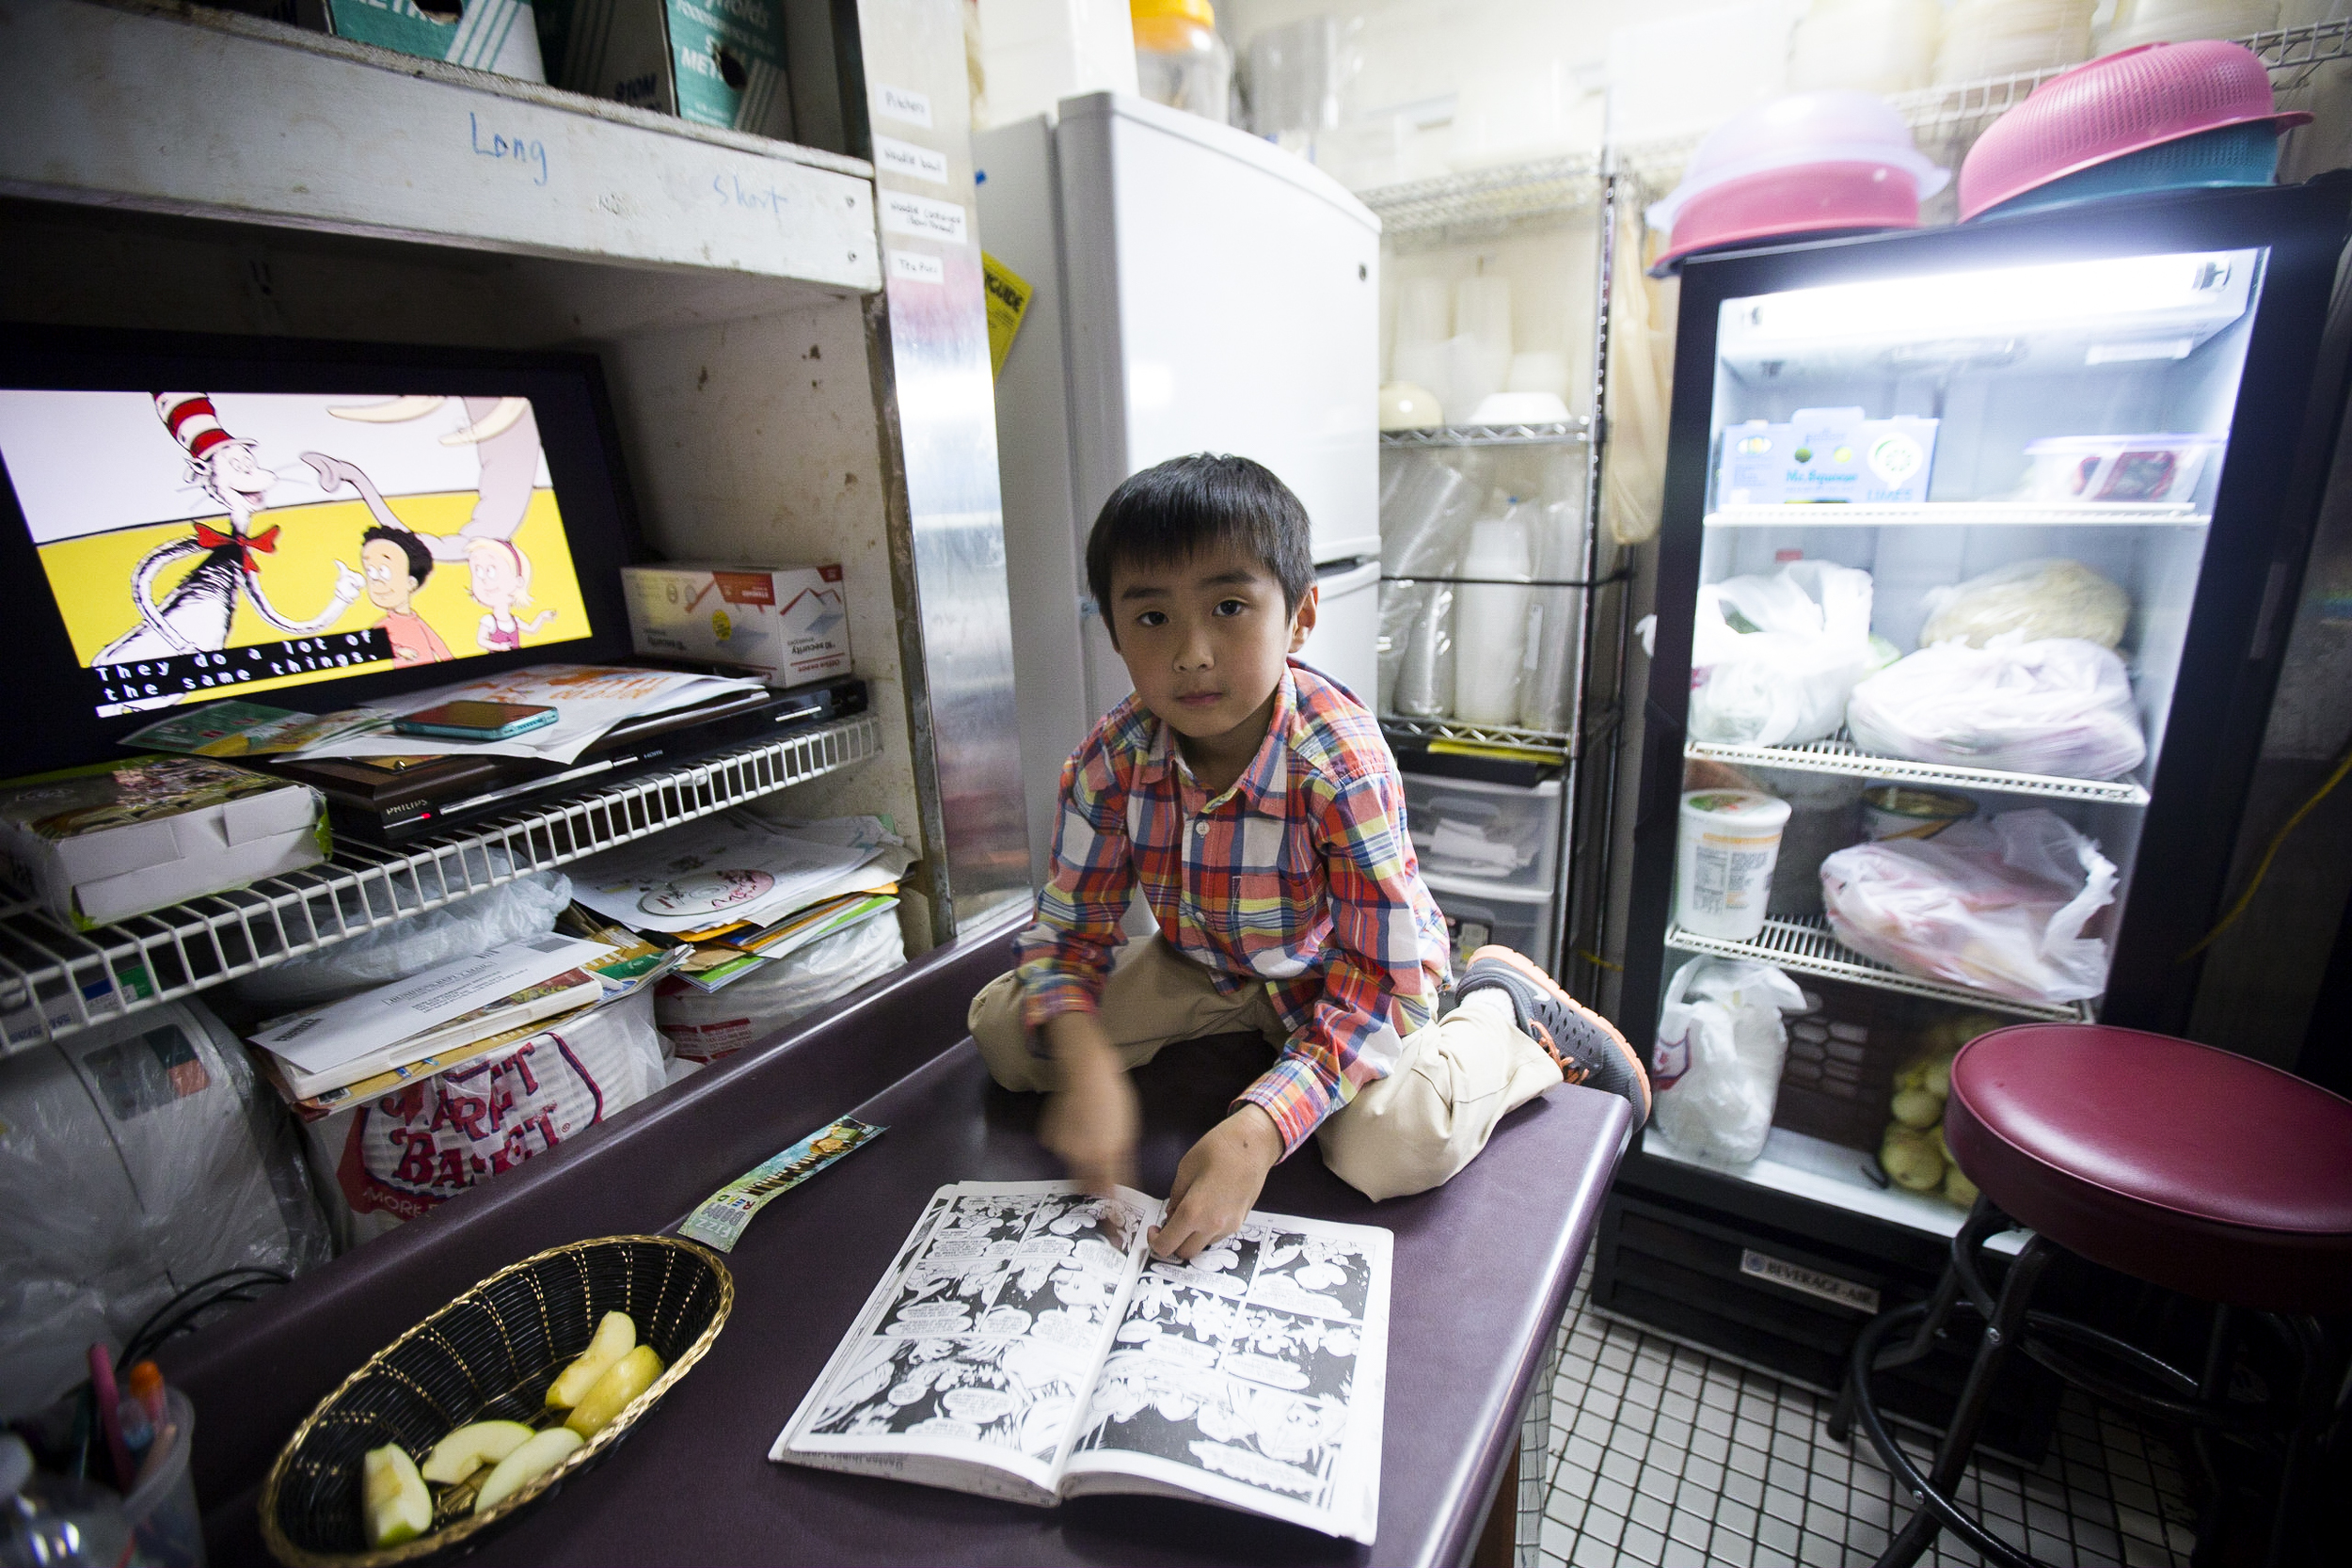  Henry Kyaw, 7. The son of Sai Kyaw reading comic books in a corner of the kitchen at Yoma. By Ann Wang 